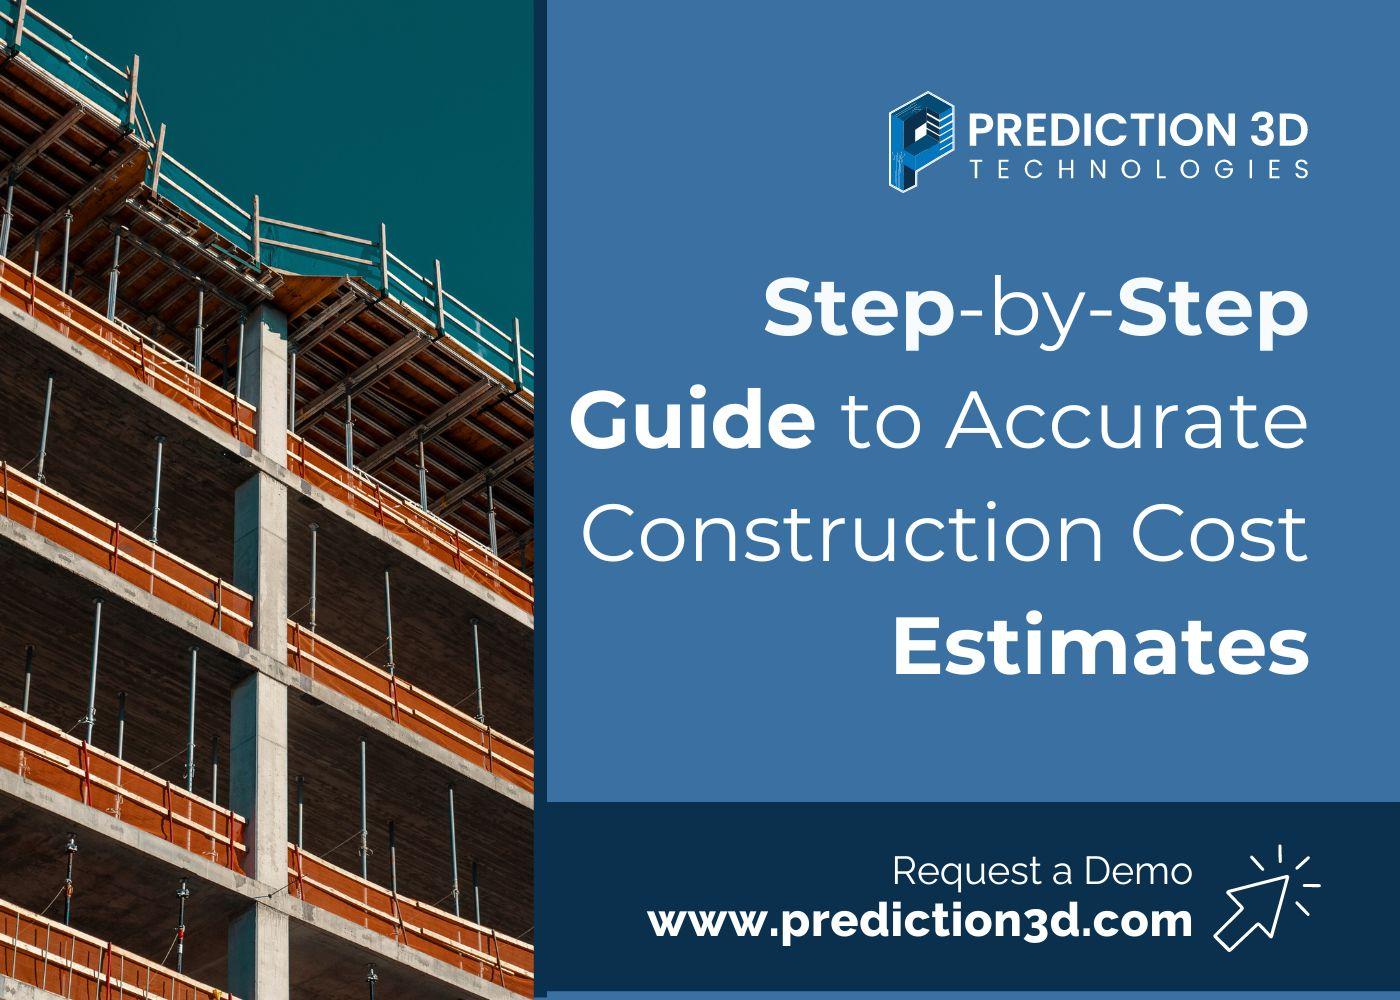 step-by-step guide to accurate construction cost estimates